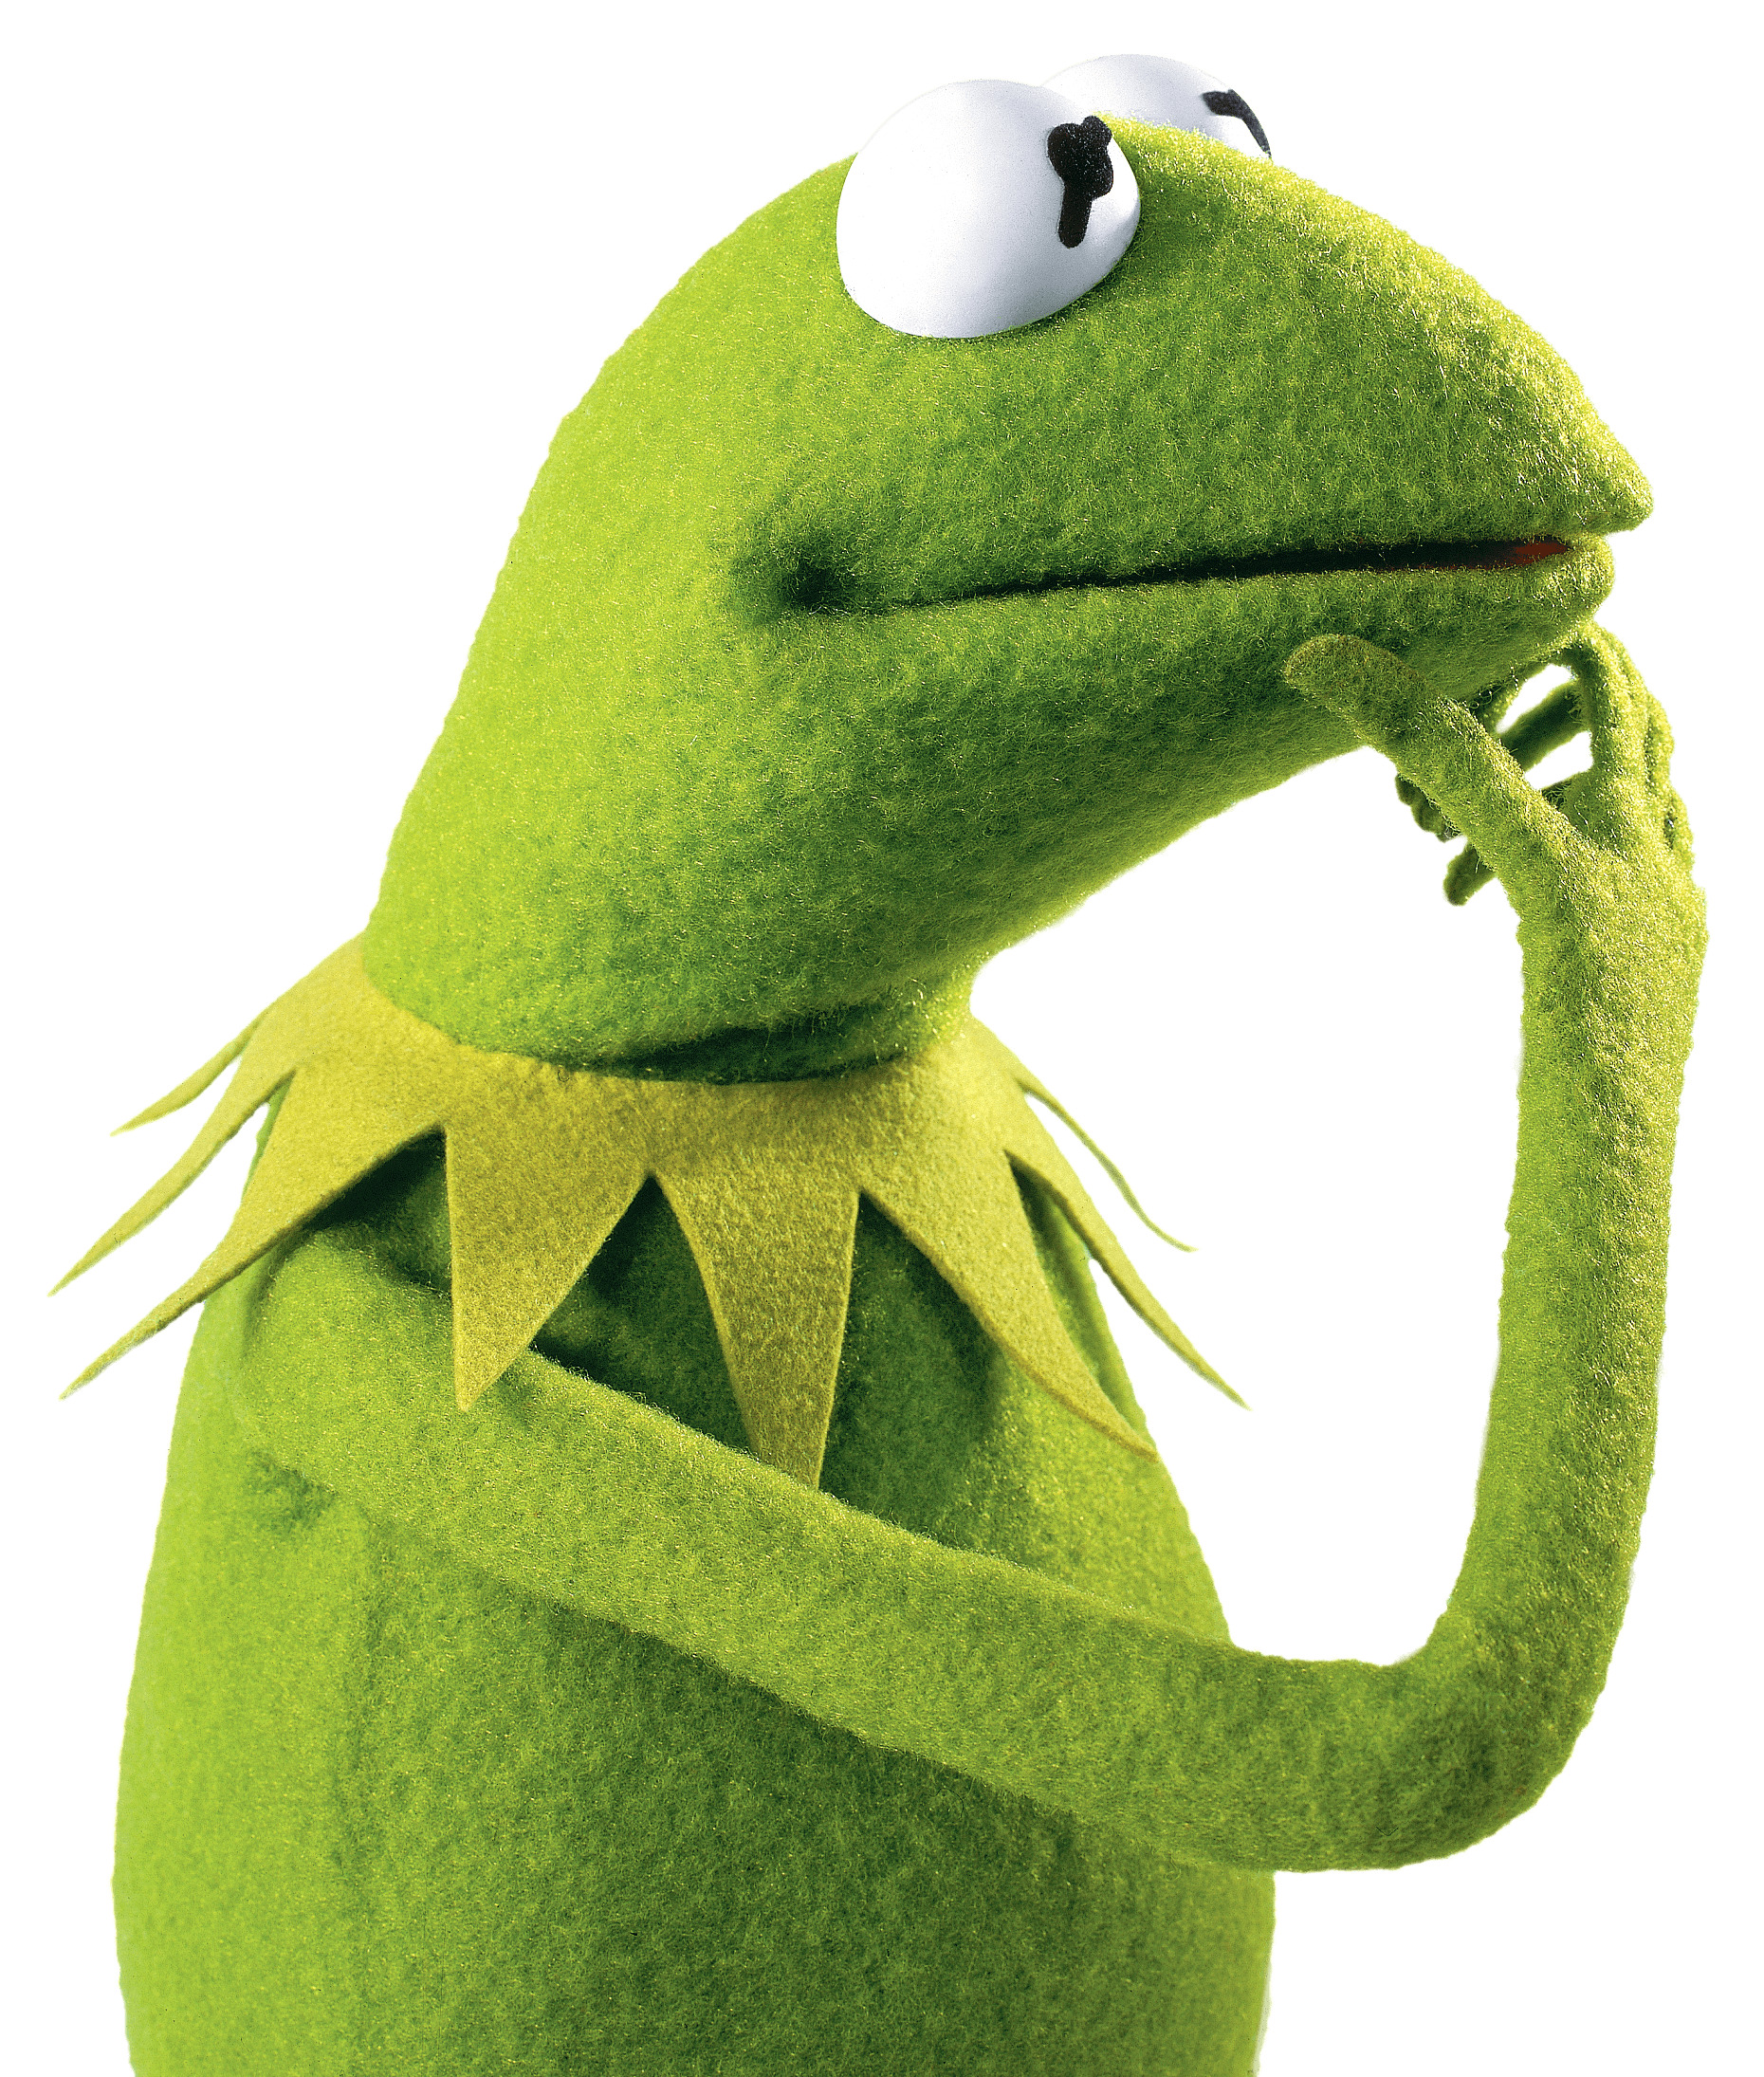 Kermit the Frog Thinking png icons